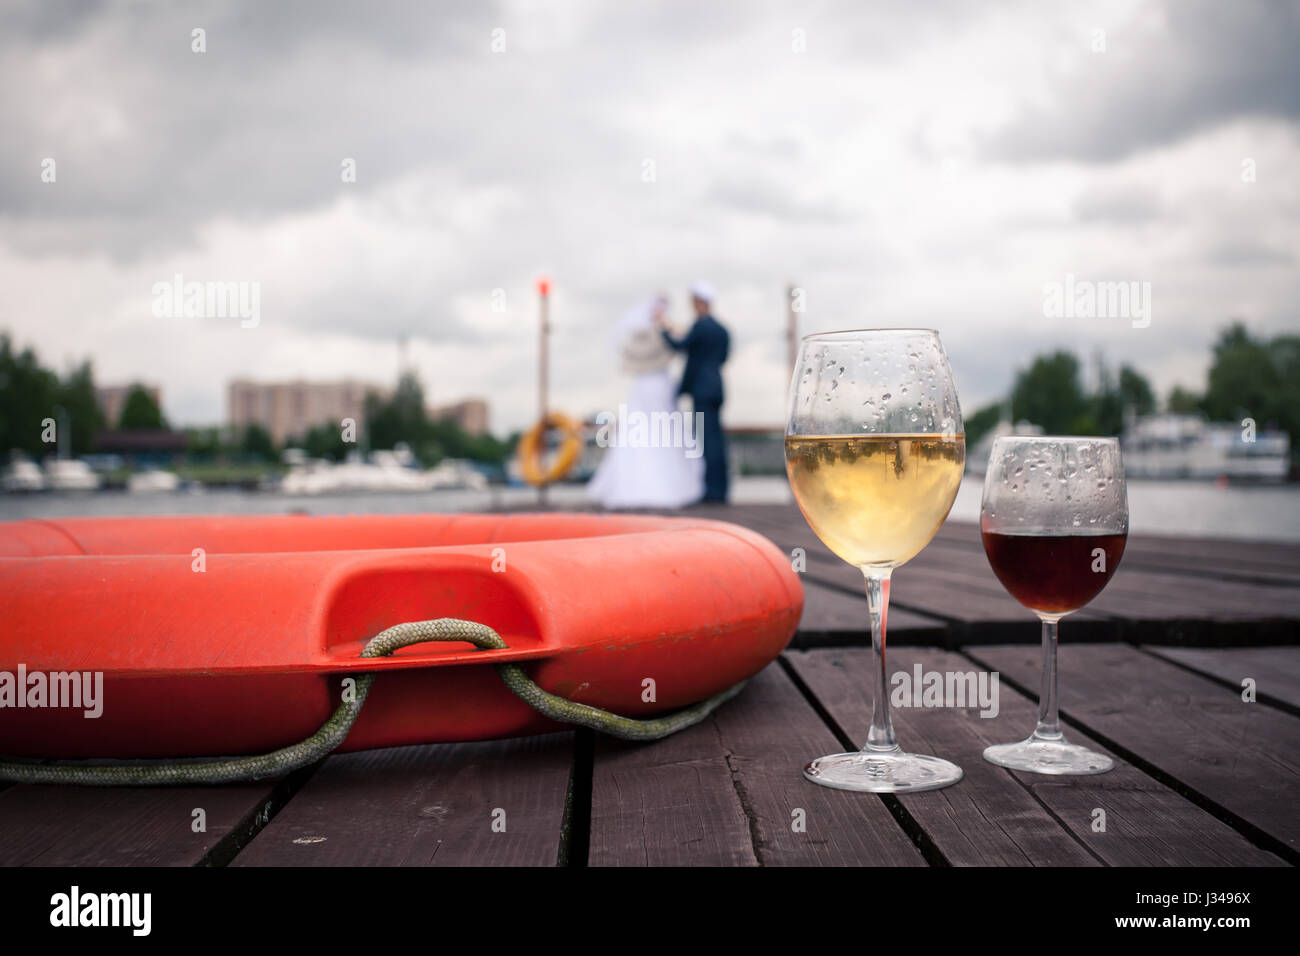 The glasses of wine on the pier next to a life raft amid honeymooners, romantic evening Stock Photo